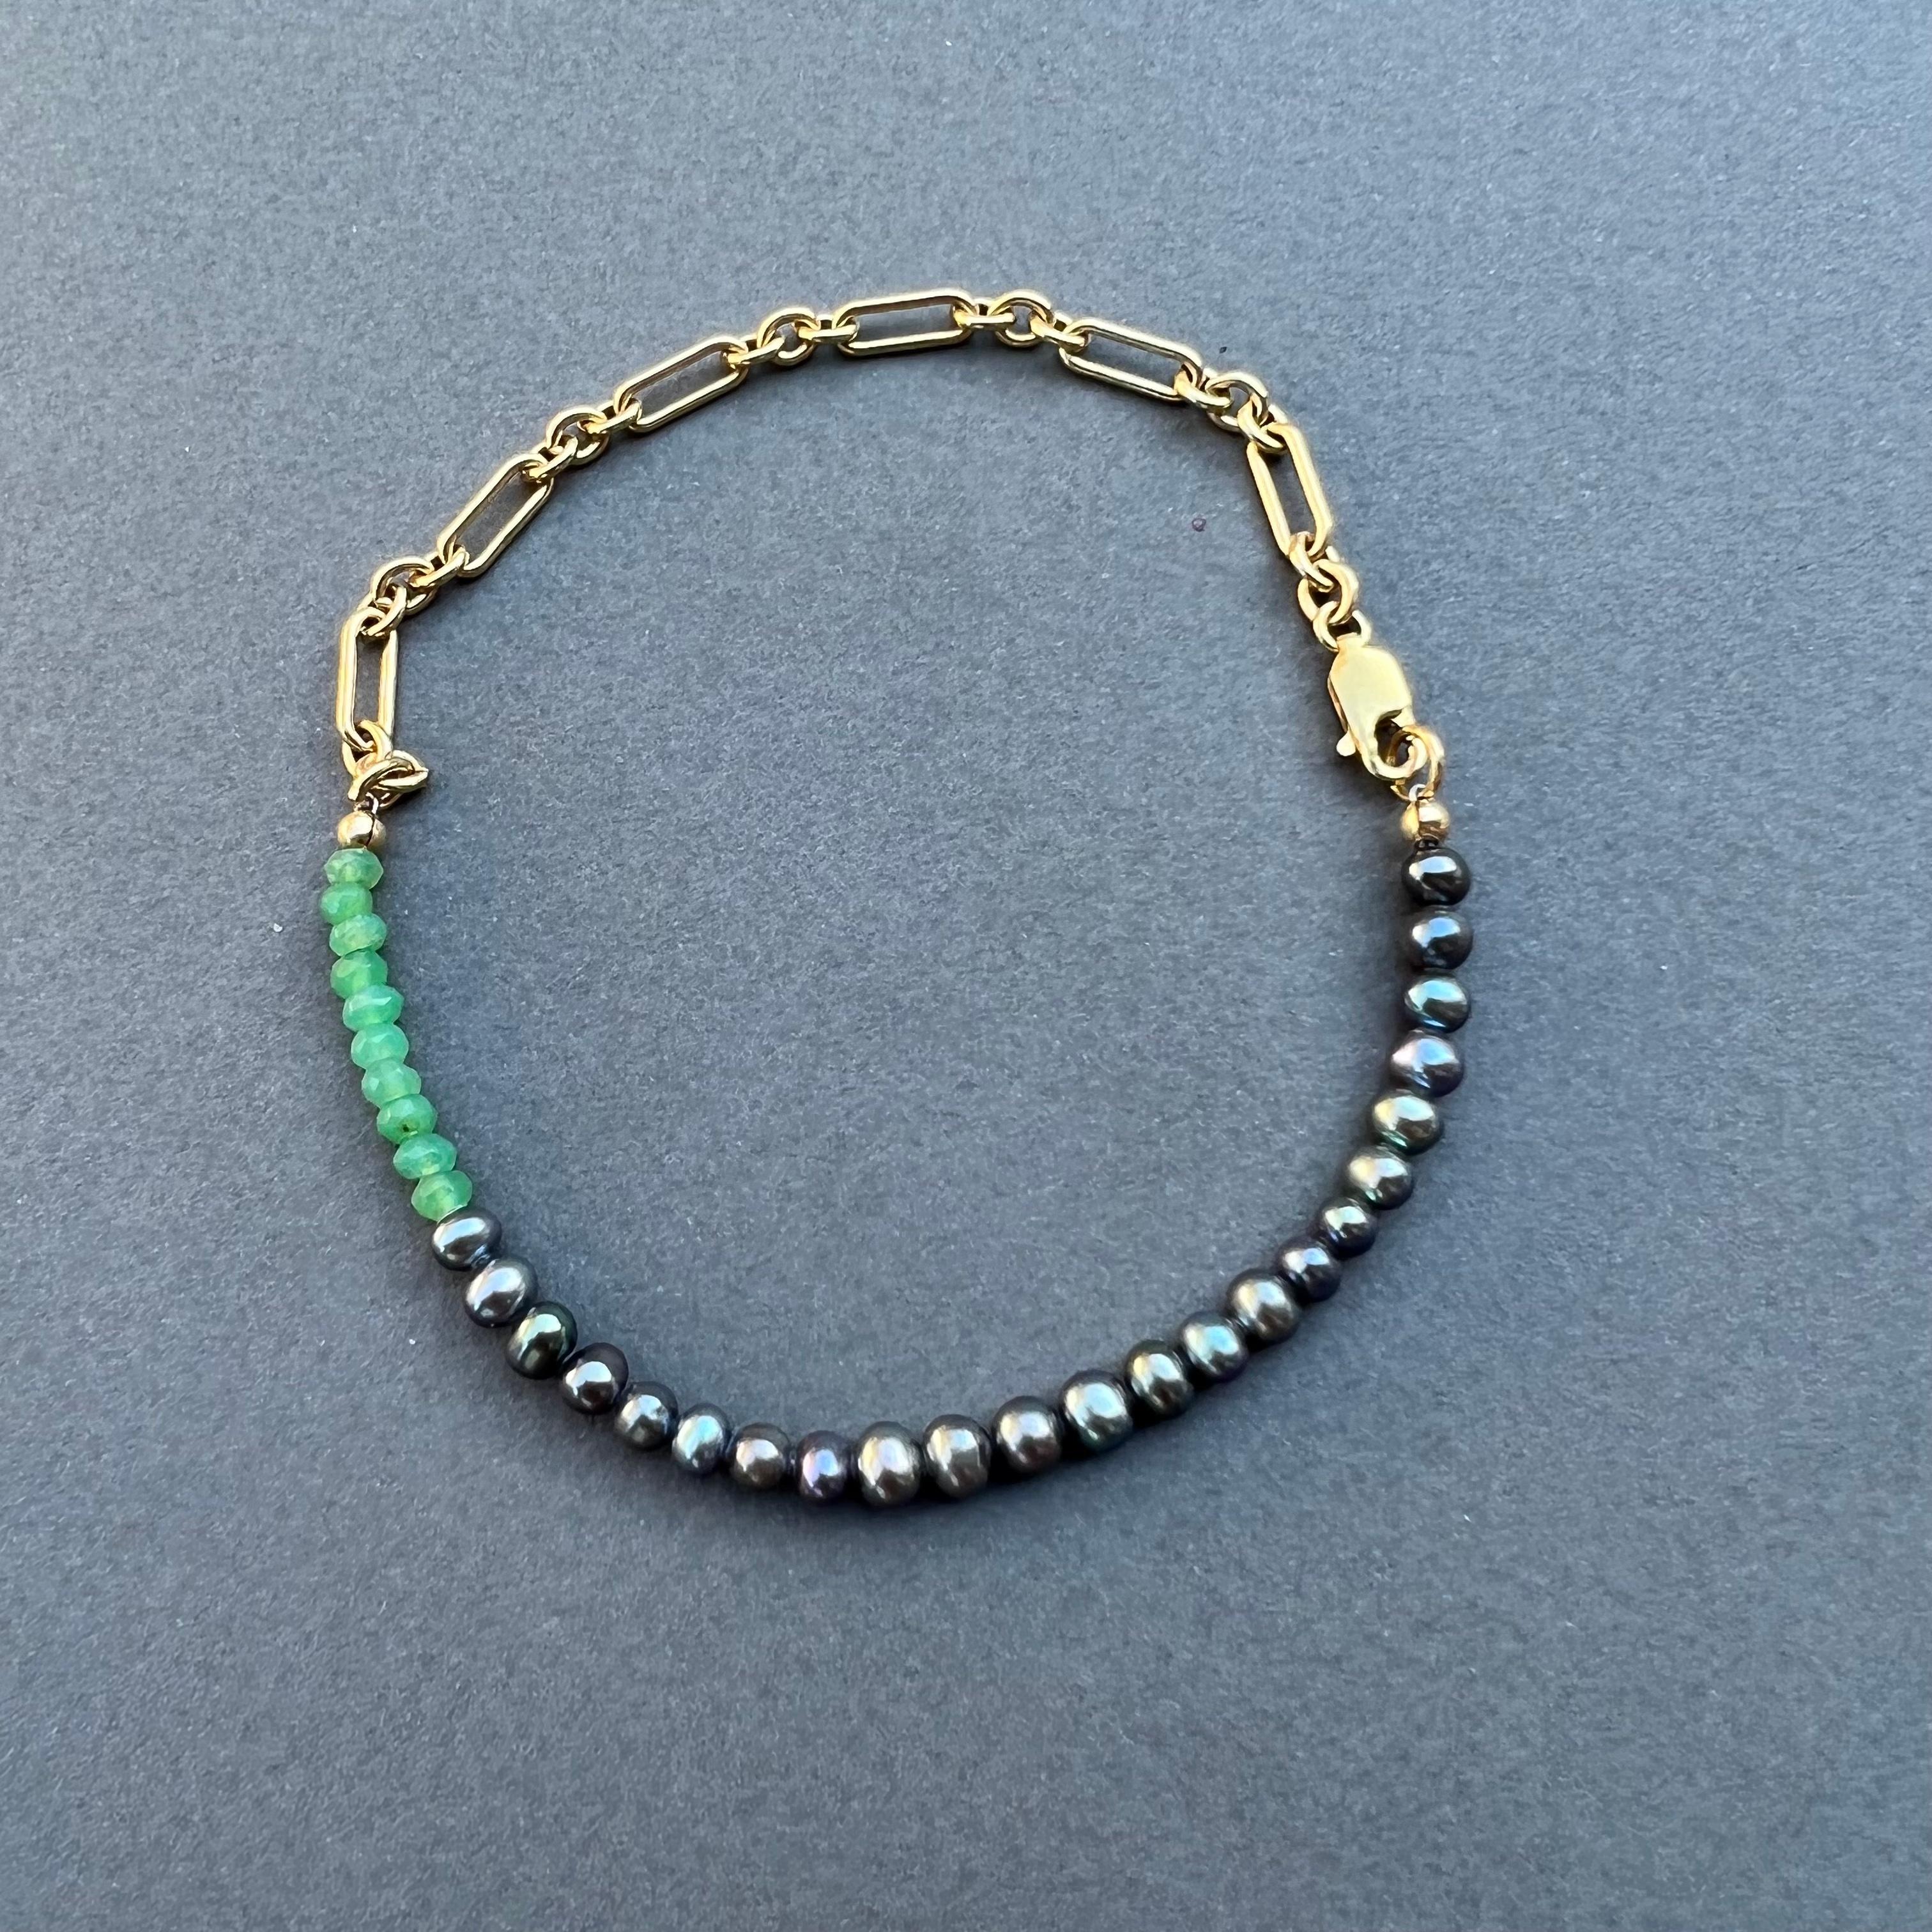 Black Pearl Bracelet Chrysoprase Gold Filled Chain Bead J Dauphin In New Condition For Sale In Los Angeles, CA